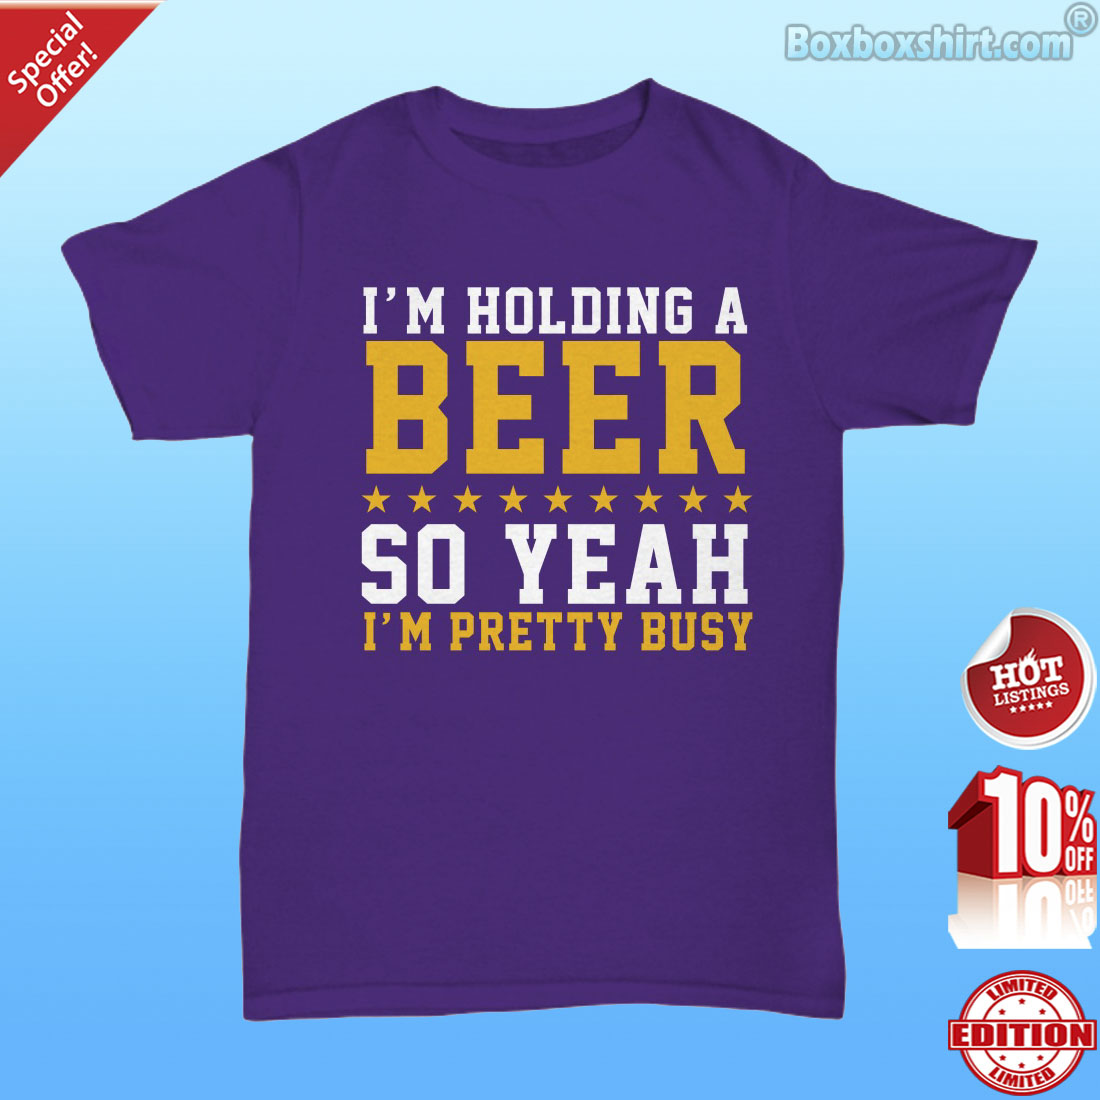 I'm hodling a beer so yeah I'm pretty busy shirt